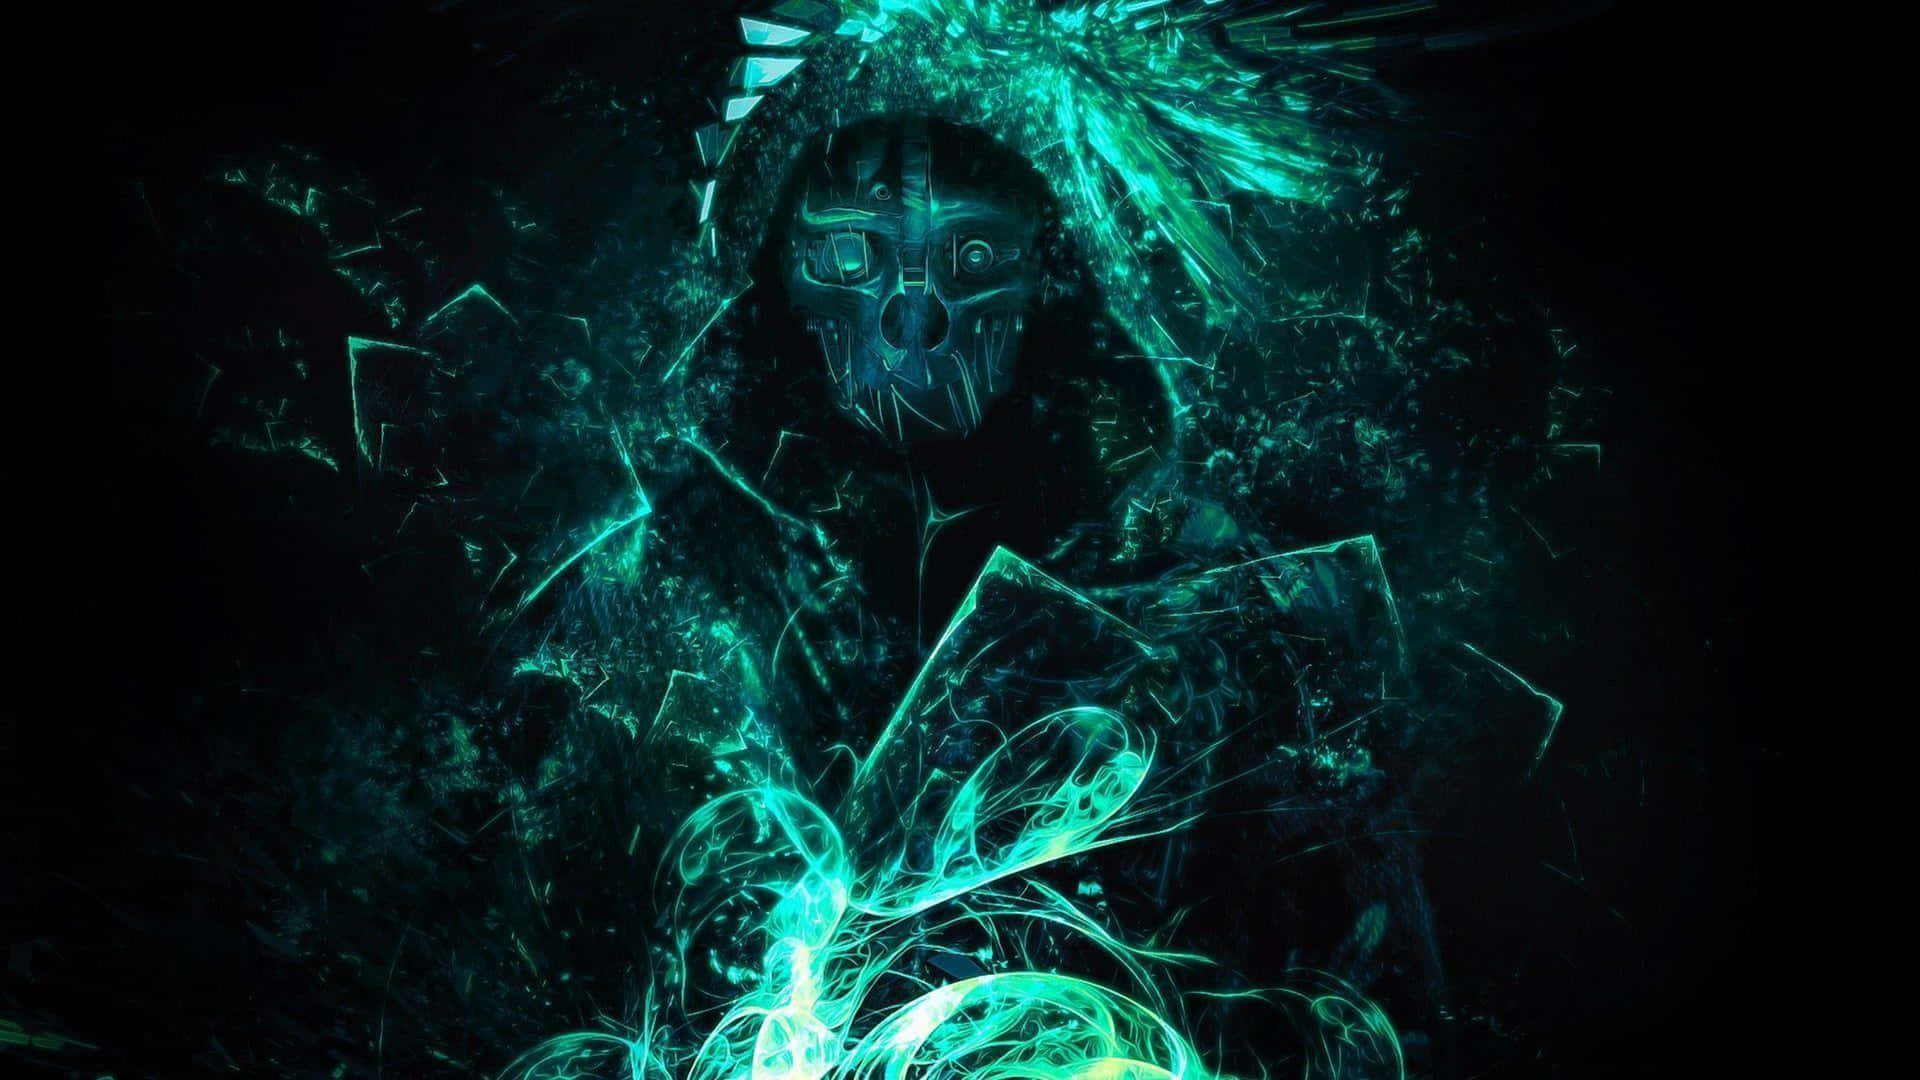 A Dark Image Of A Man In A Hood With Green Lights Wallpaper